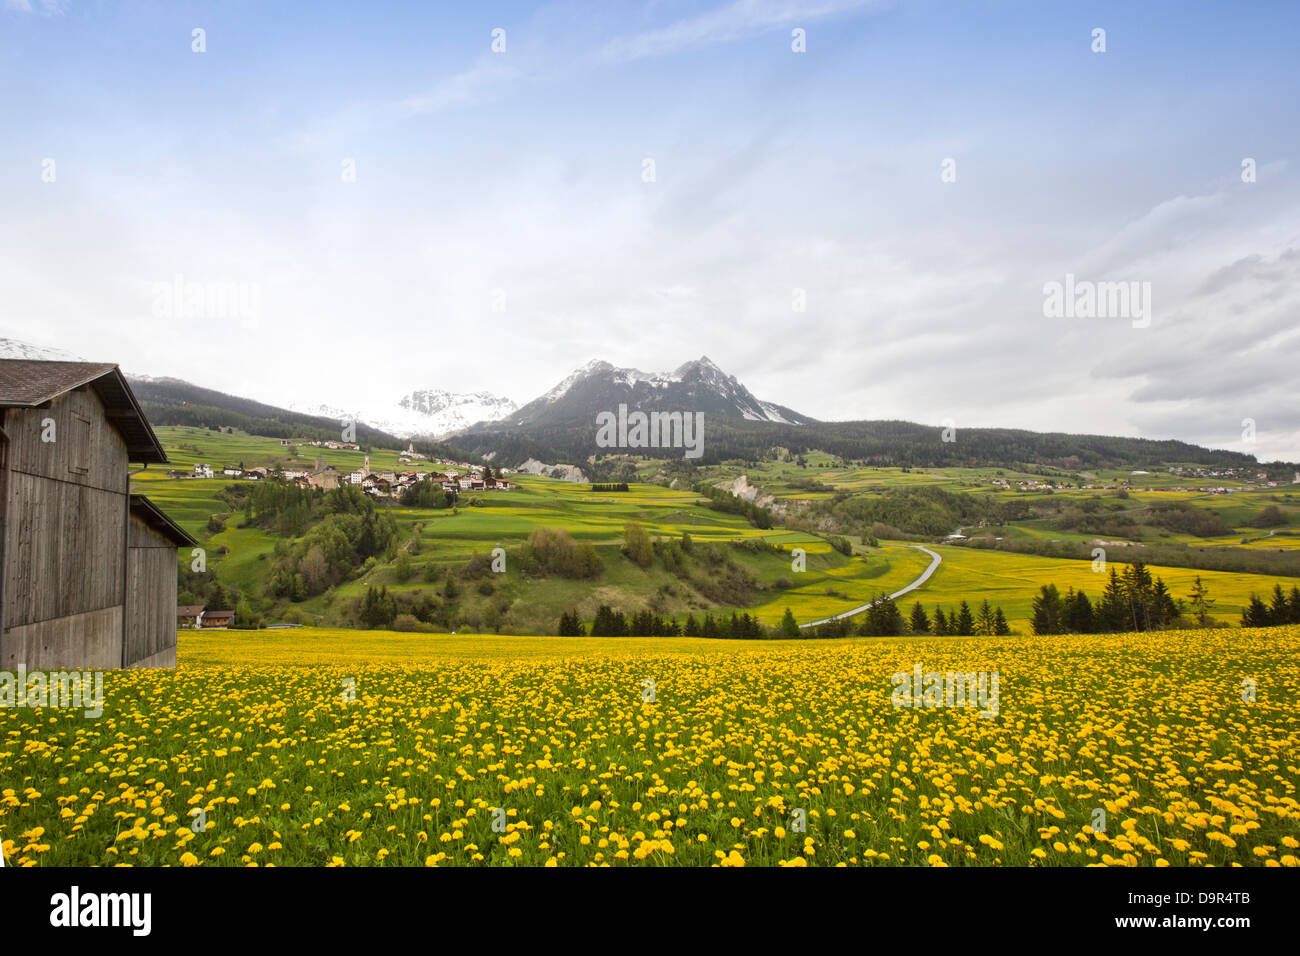 Yellow flowers in bloom at a valley, St. Moritz, Italy Stock Photo